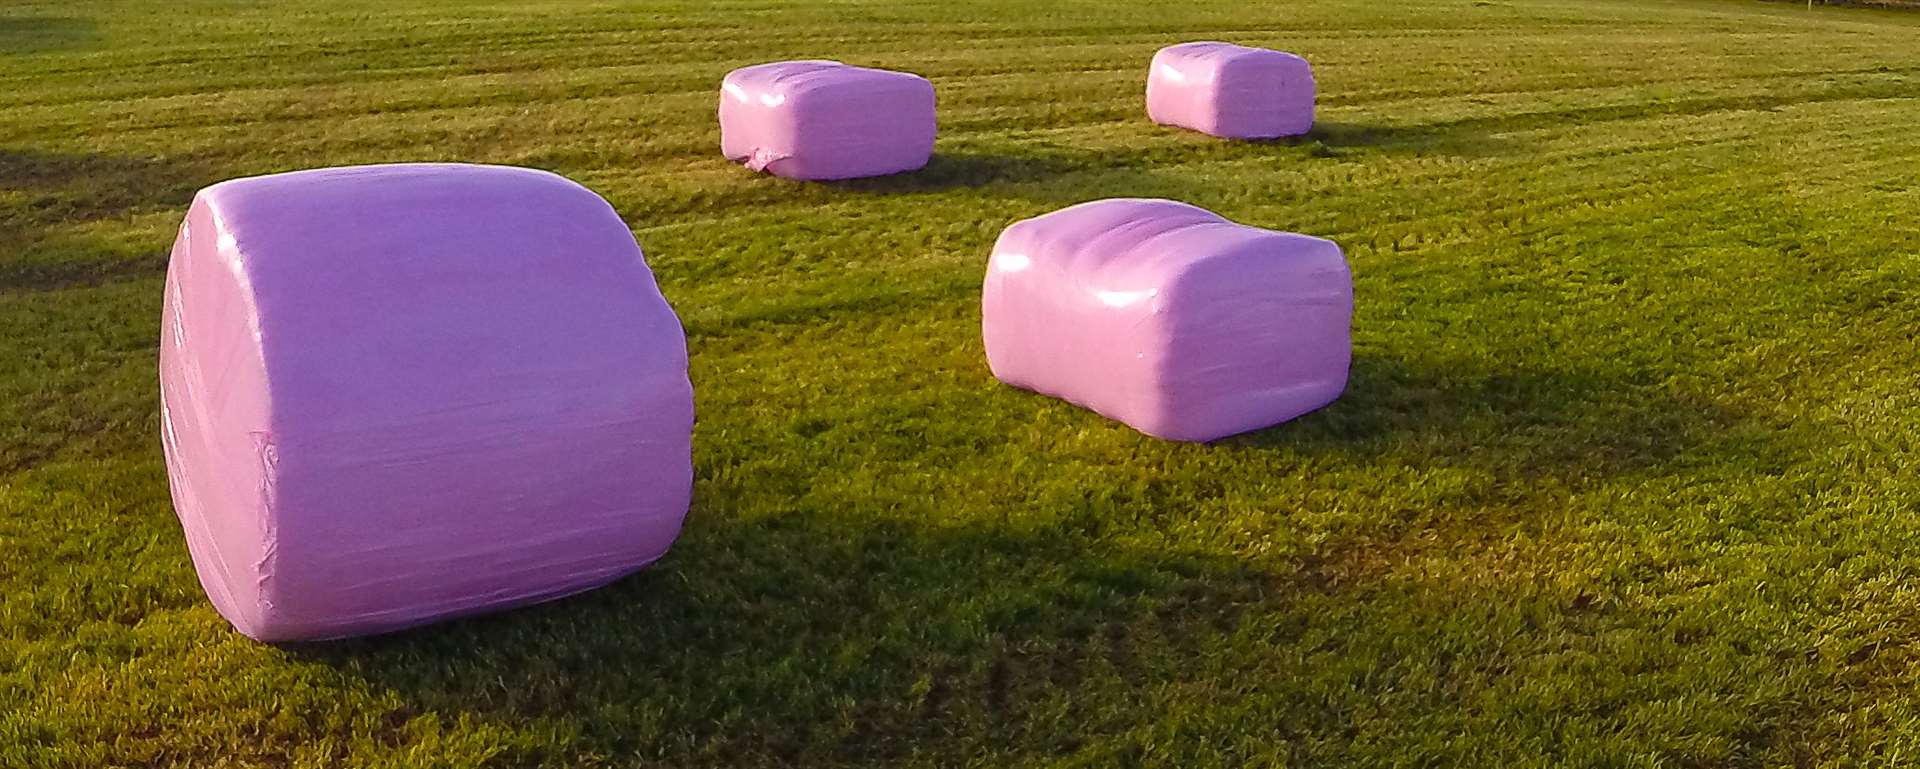 Bale wrap comes in pink too to raise money for breast cancer charities.